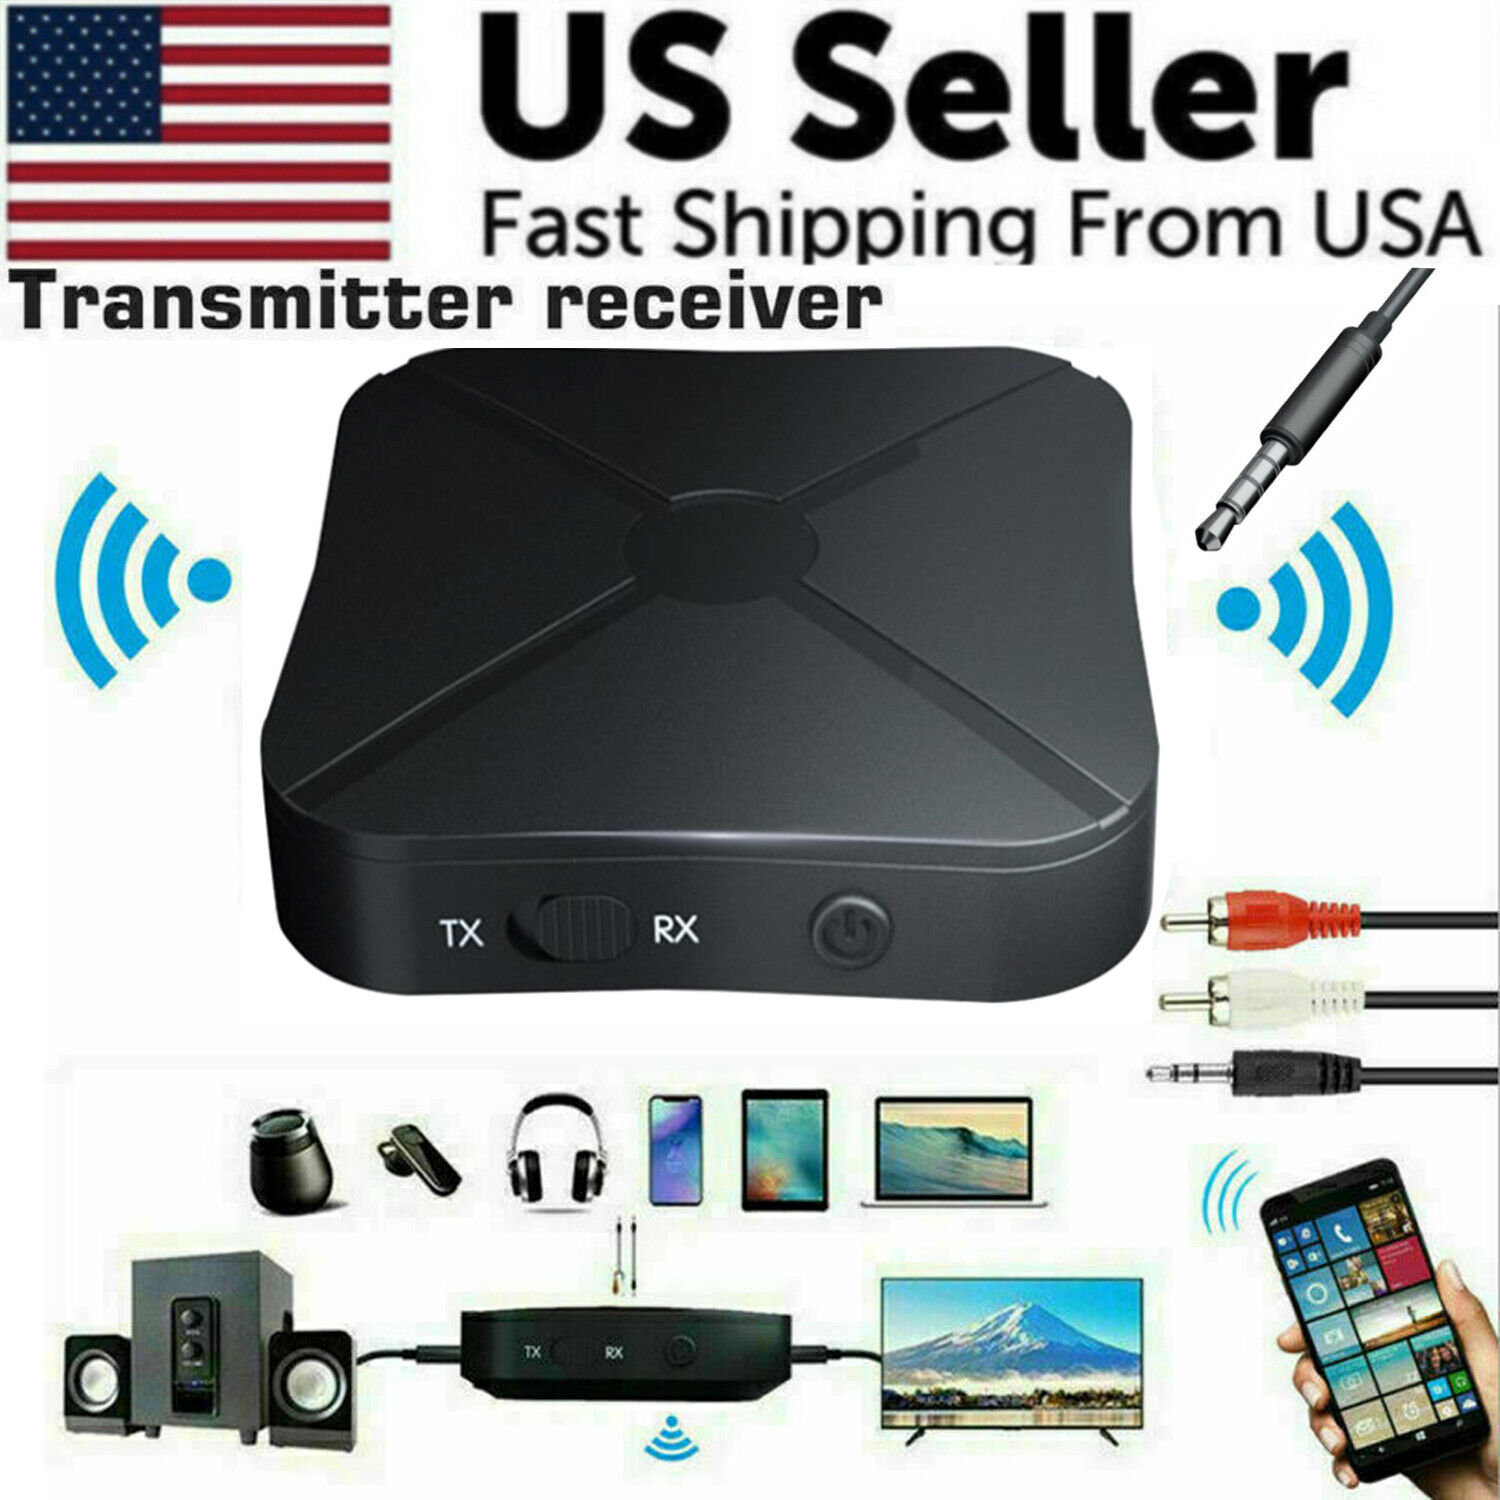 2in1 Bluetooth Transmitter Receiver Wireless Adapter TV Home Stereo A2DP Audio